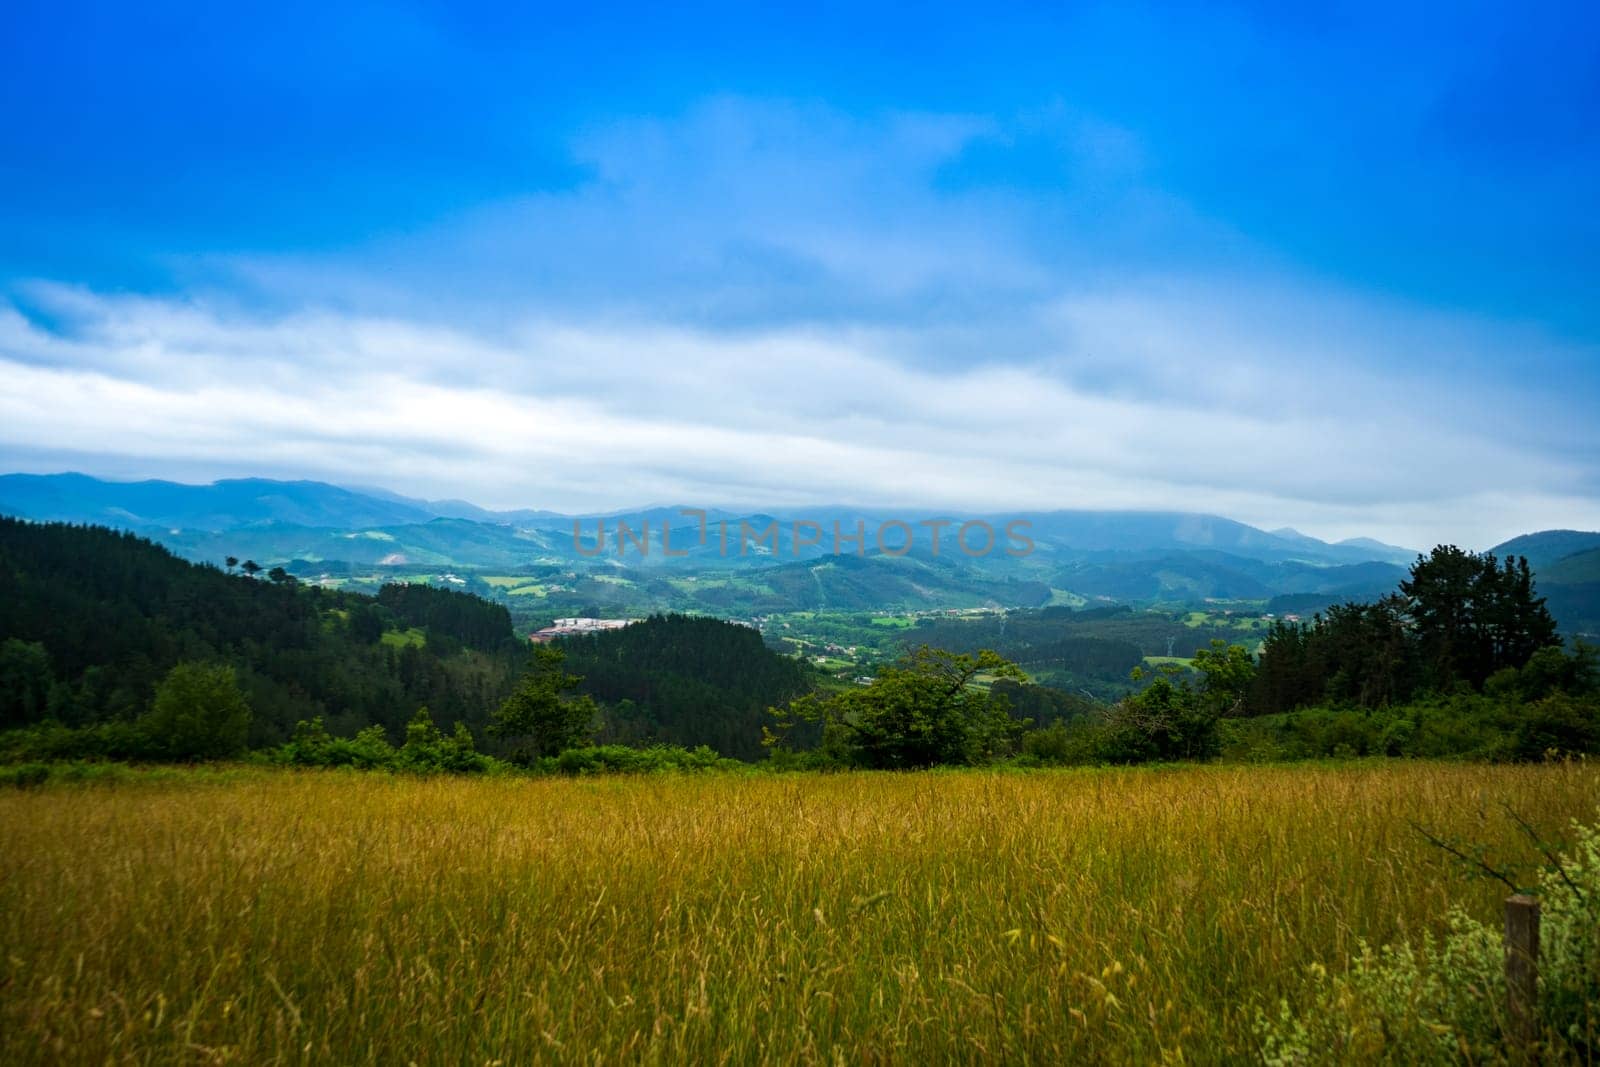 landscape in mountains. grassy field and rolling hills out of focus. rural scenery. by paca-waca